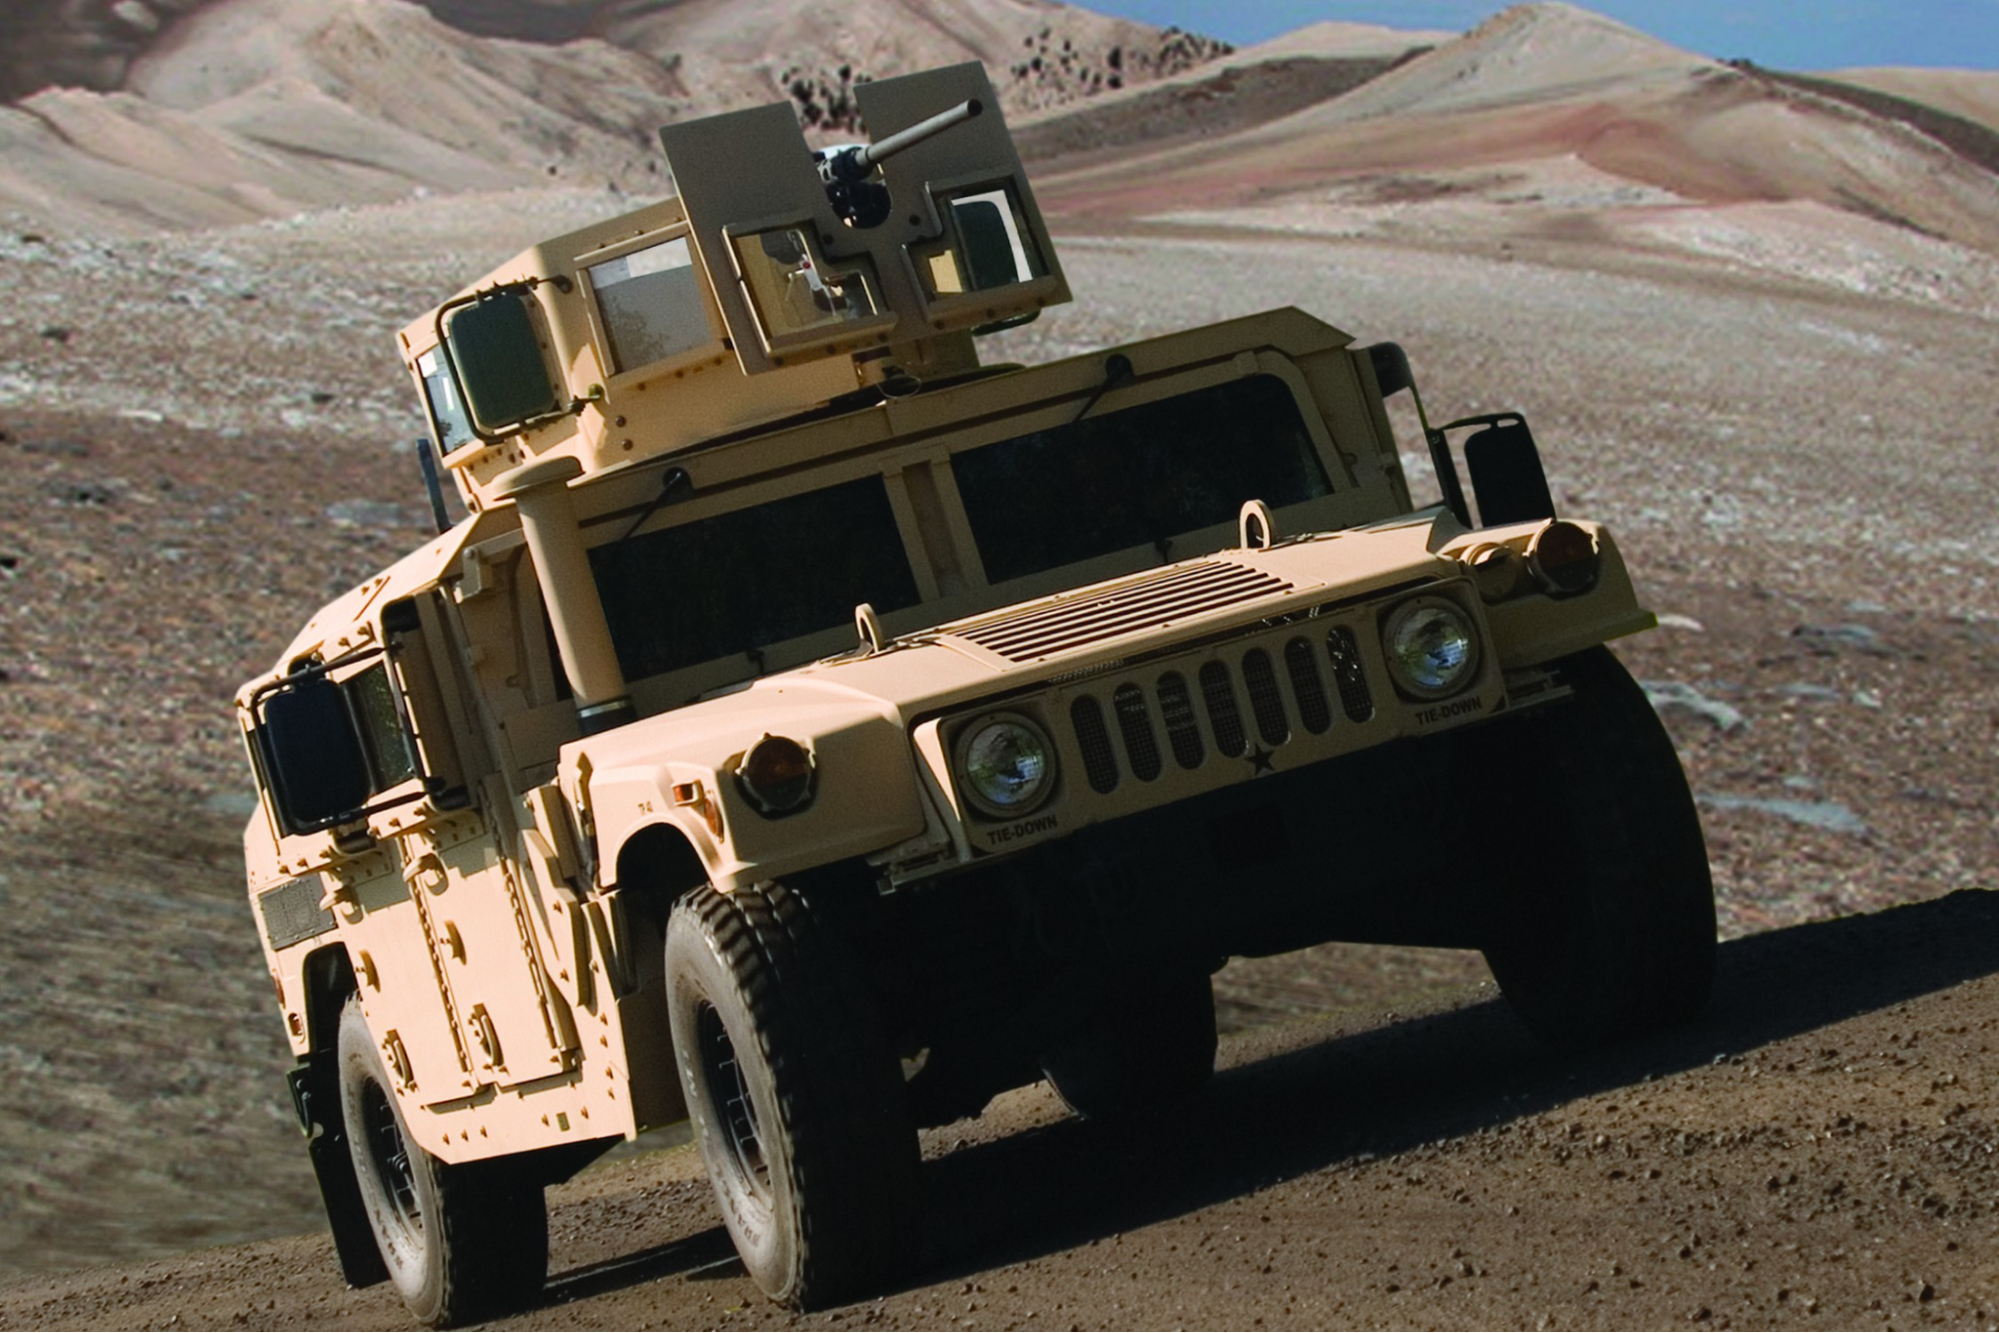 US Army to 3D Print Parts for Humvees
